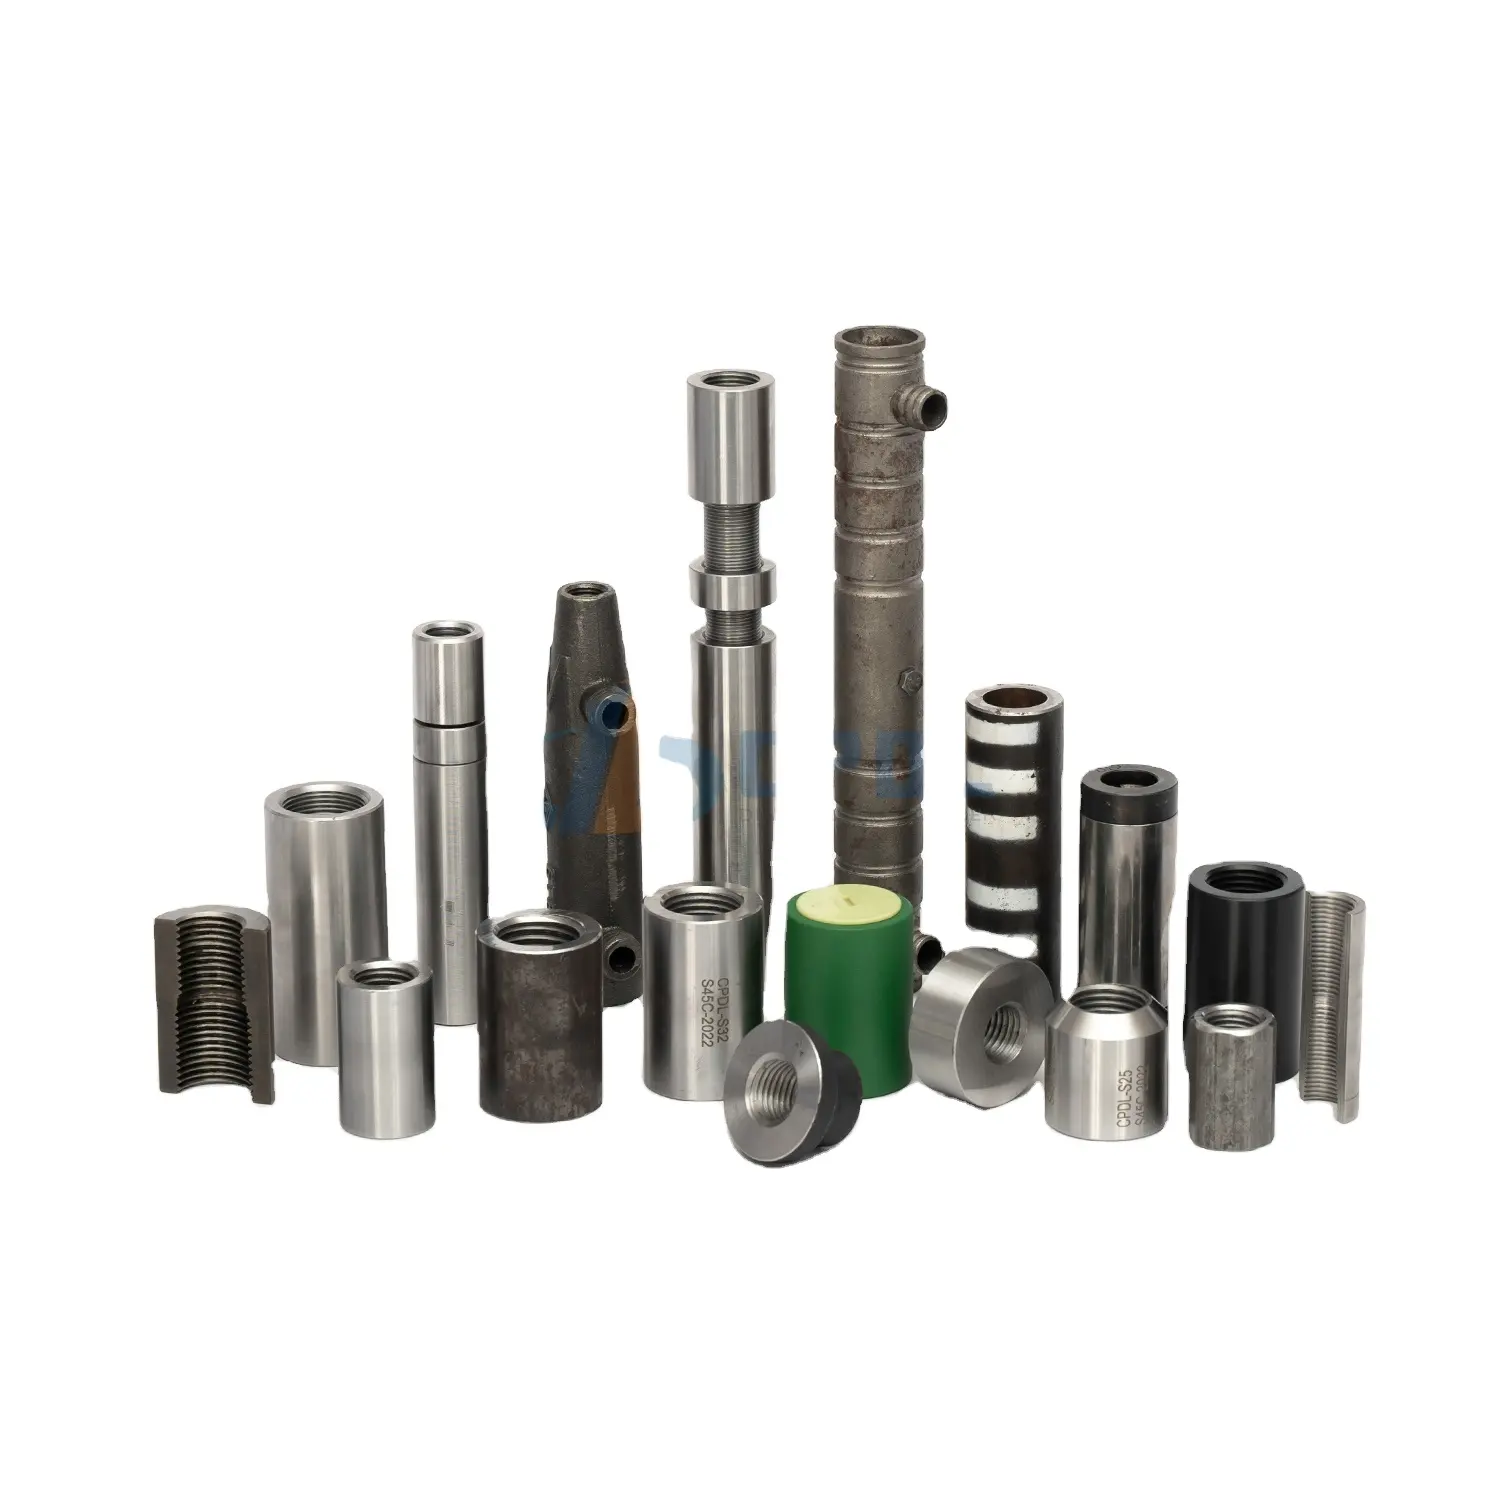 Many Types of Metal Building Material Coupler for Rebar